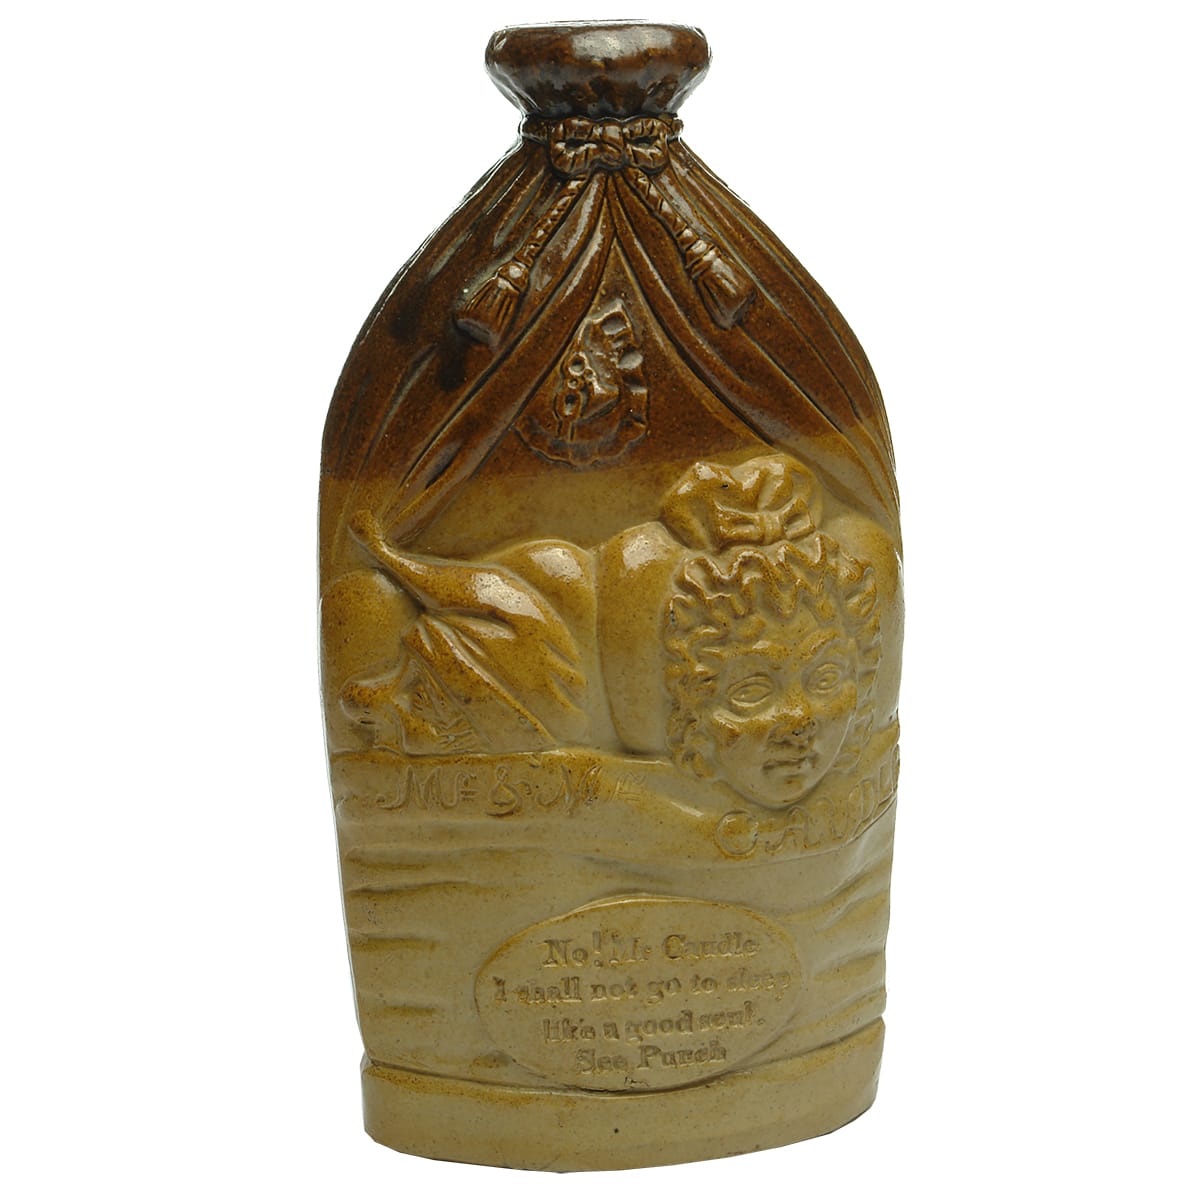 Reform Flask. Mr & Mrs Caudle. Doulton & Watts, Pottery.